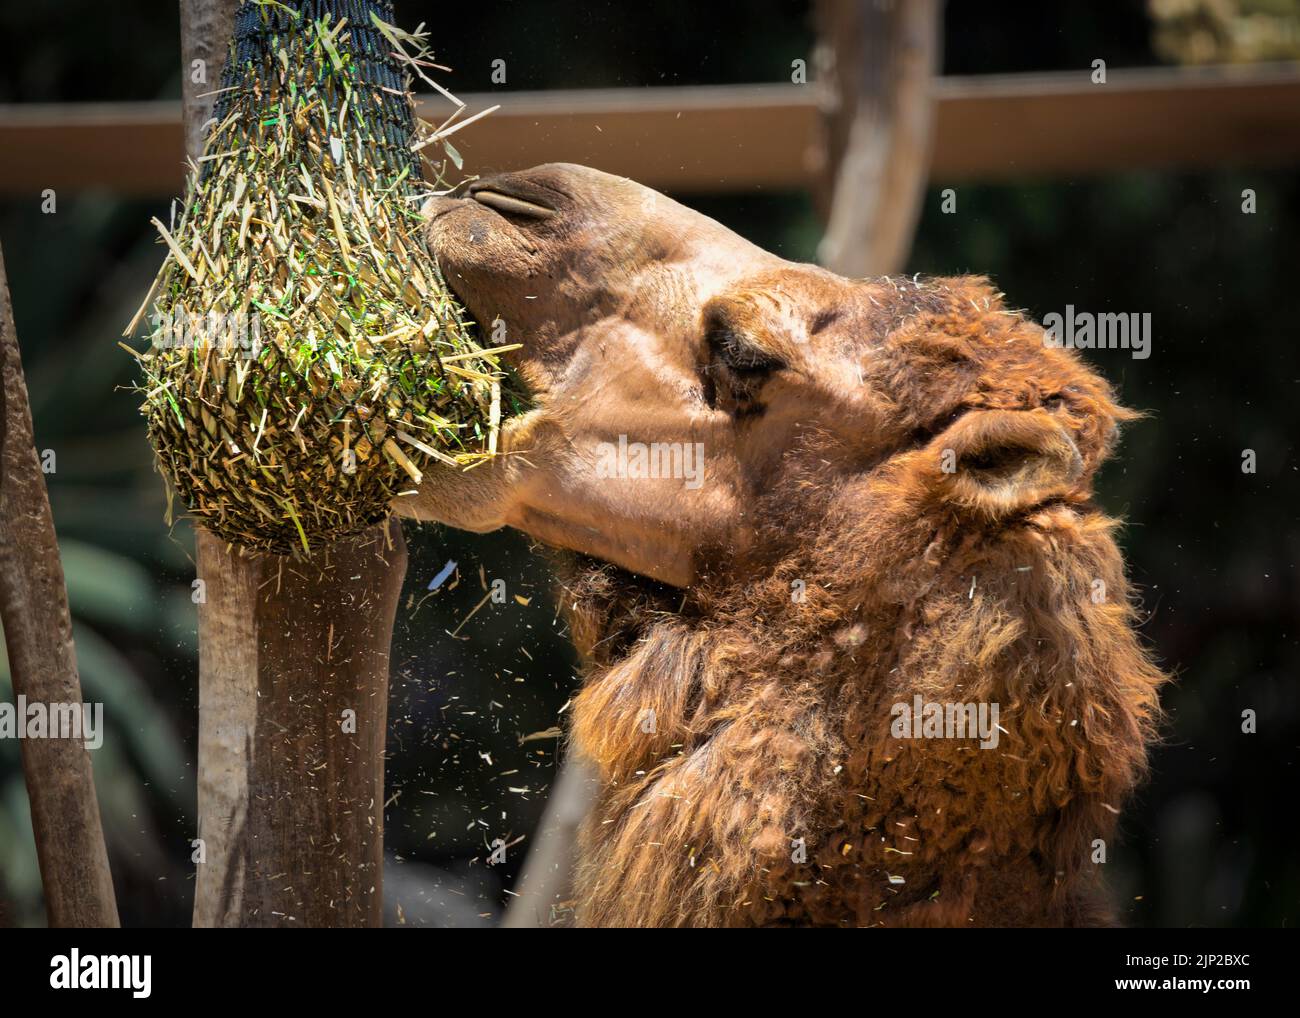 A camel having a satisfying morning snack of suspended hay at a zoo in southern California. Stock Photo